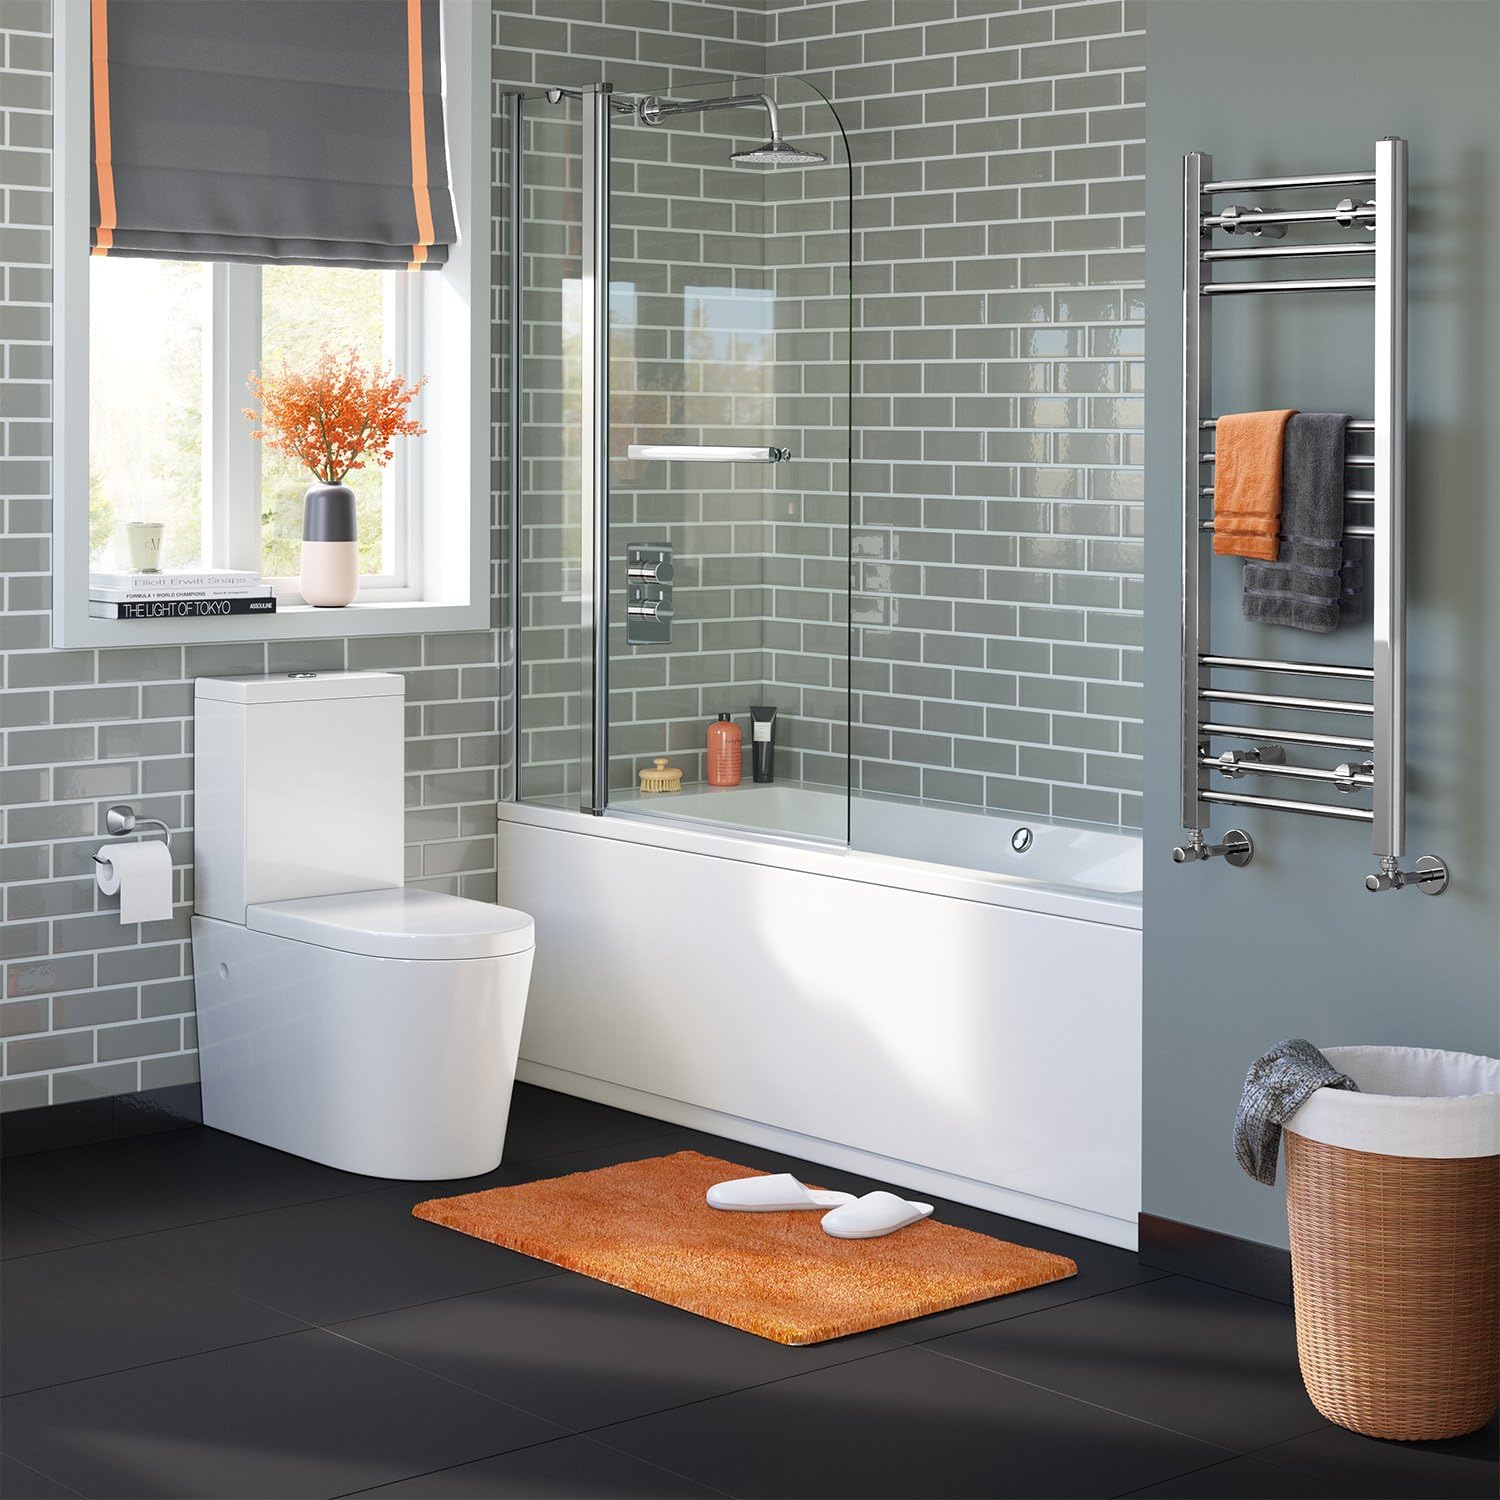 Modern Shower Bath Screen With Panel And Towel Rail - 1400mm x 1000mm - Chrome